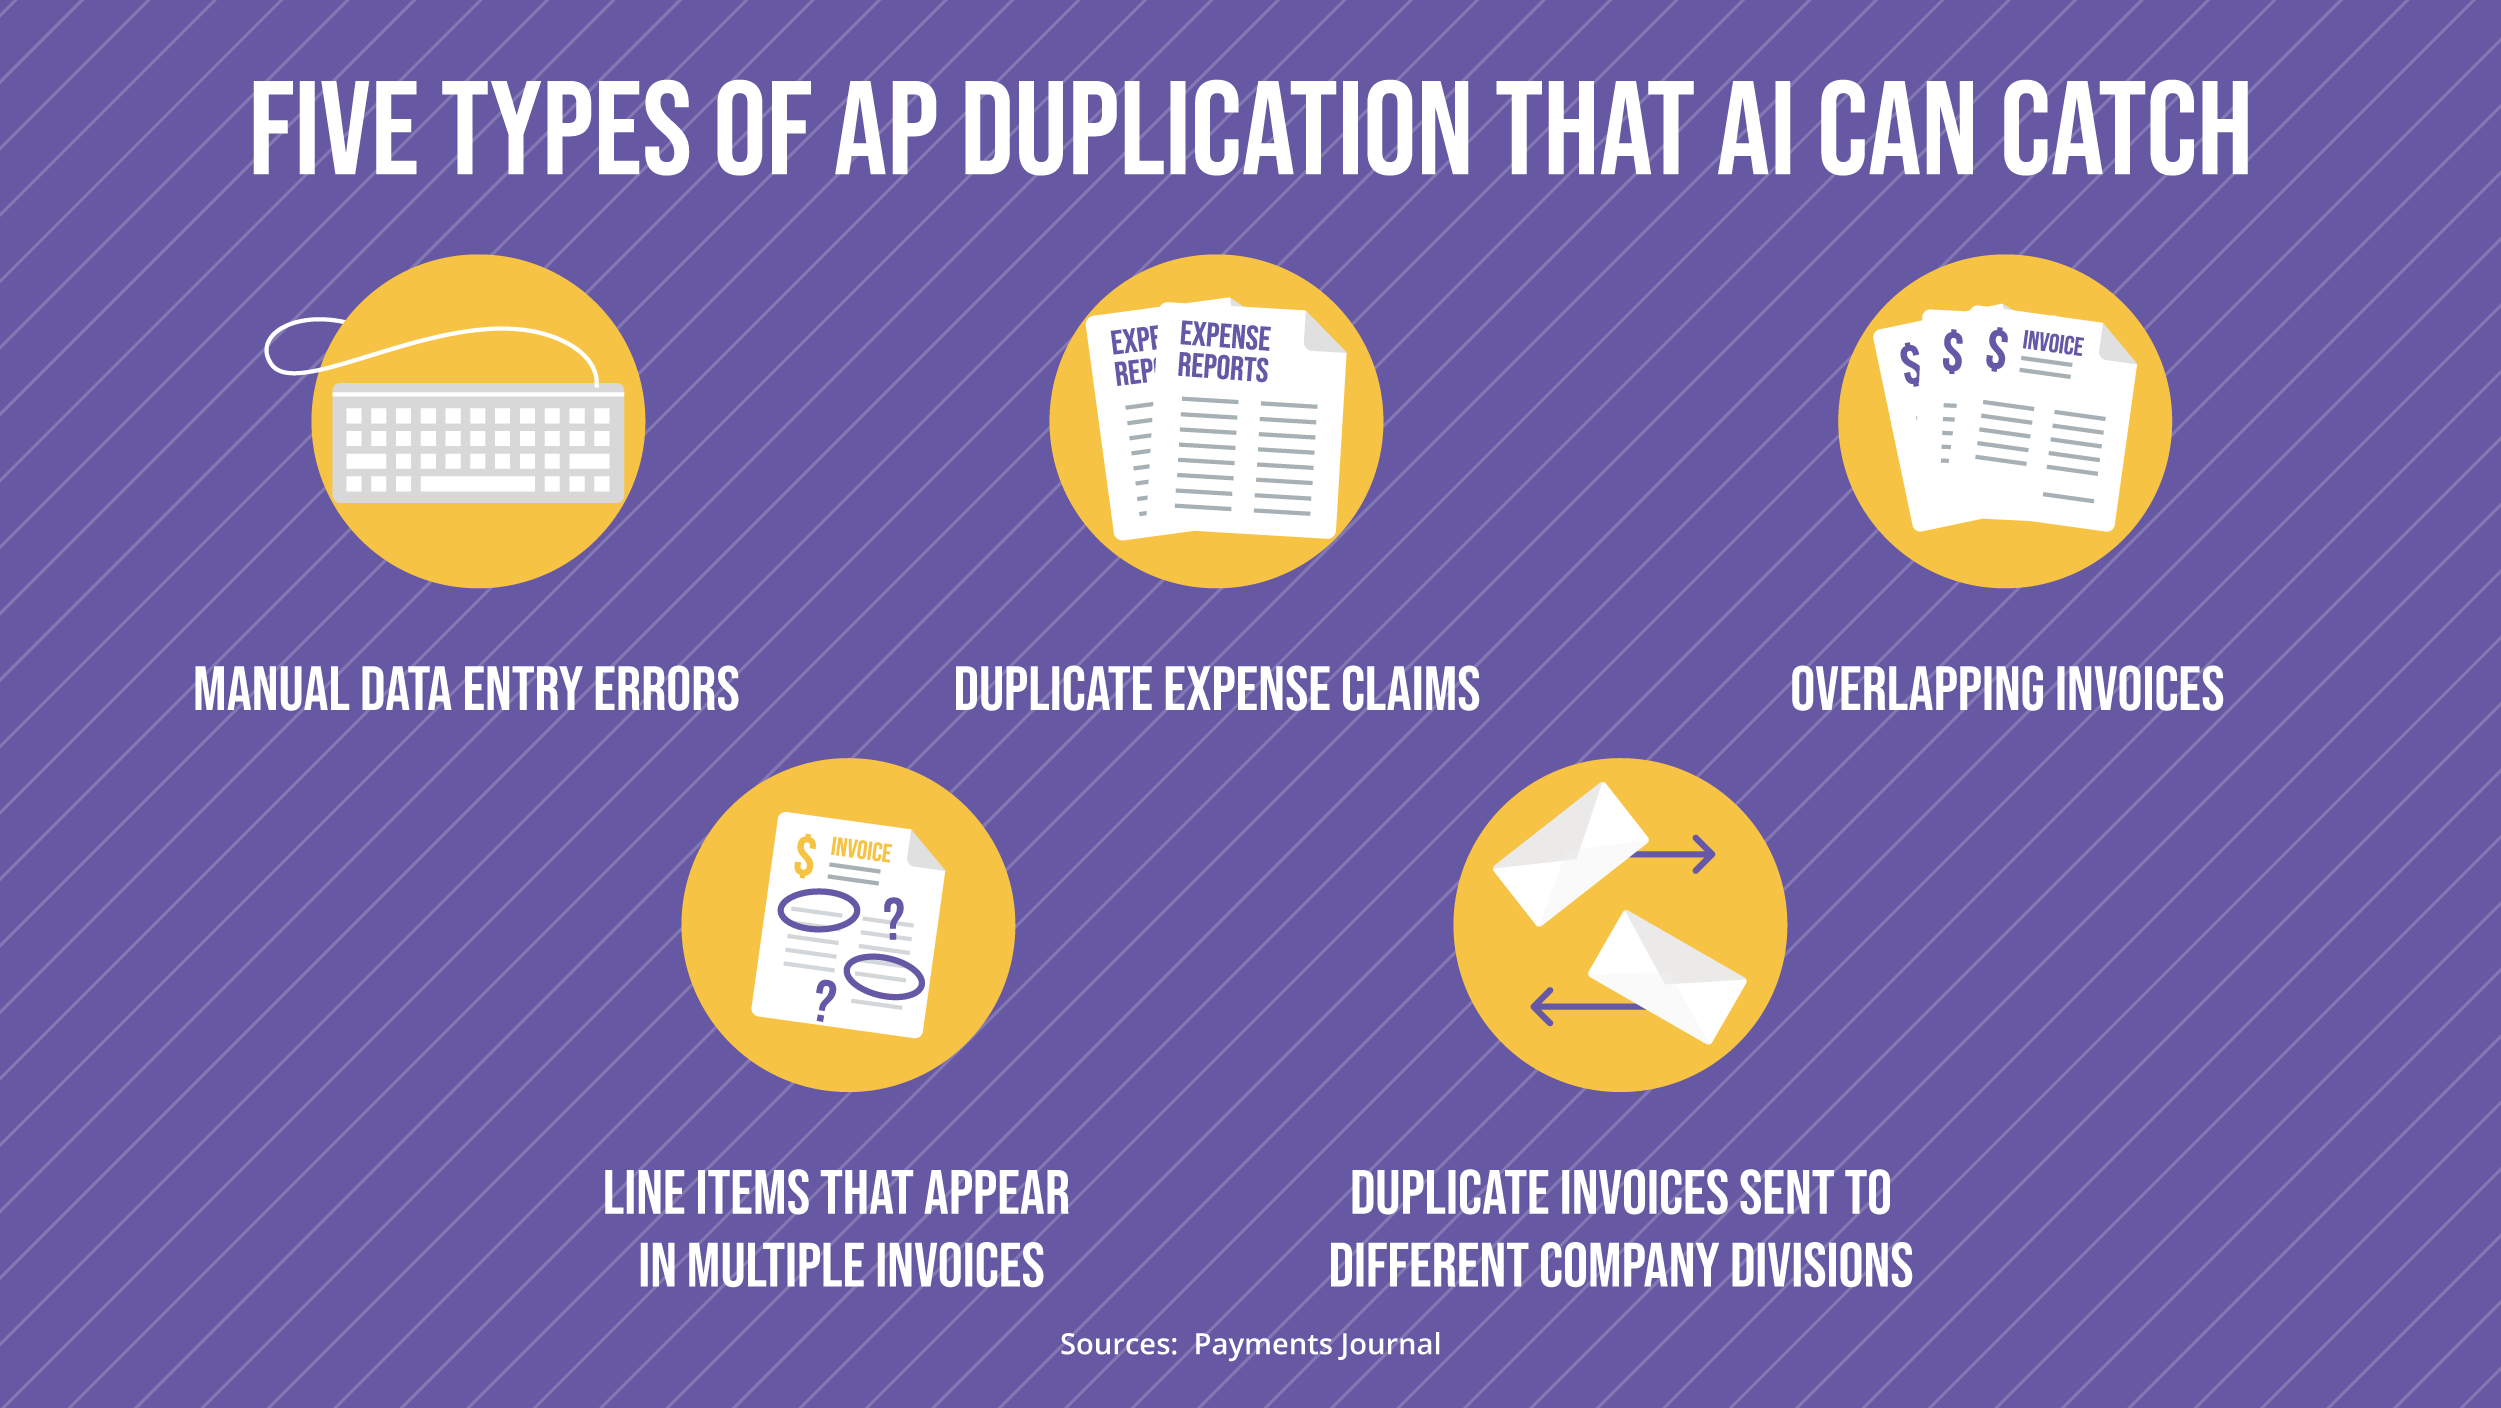 How do Companies use AI to Check Duplicate Invoices?